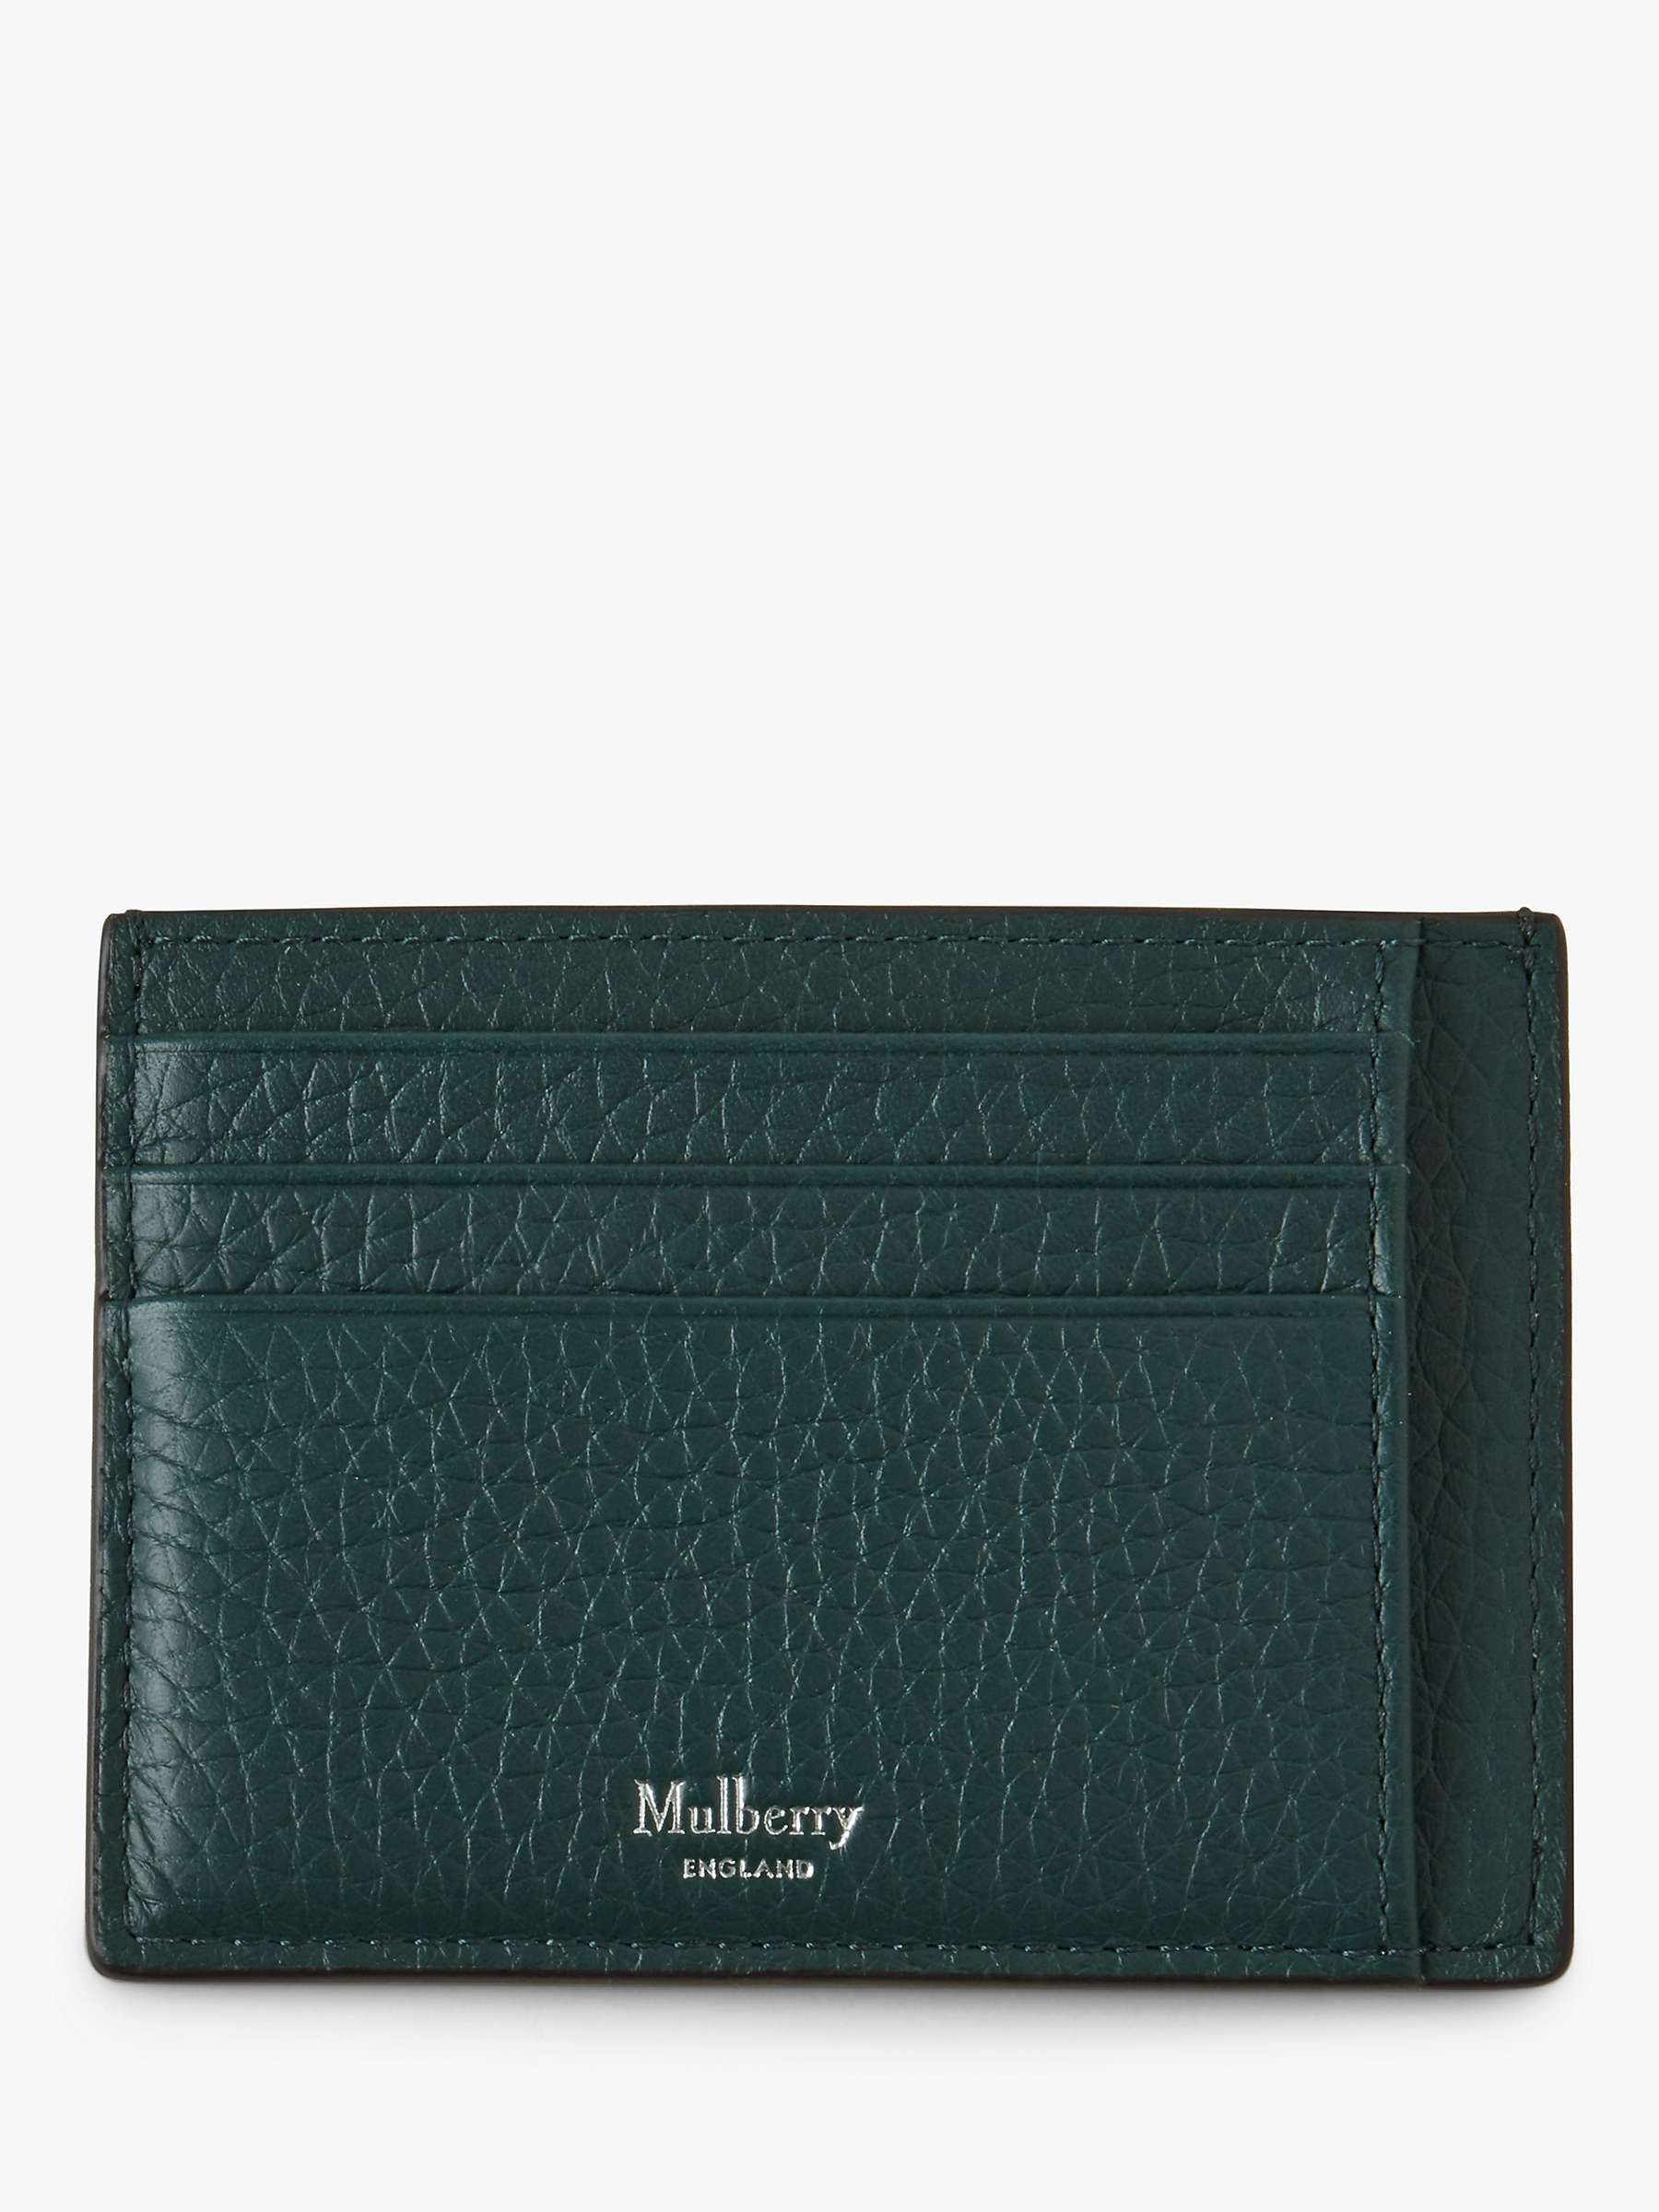 Buy Mulberry Heavy Grain Leather Card Holder Online at johnlewis.com